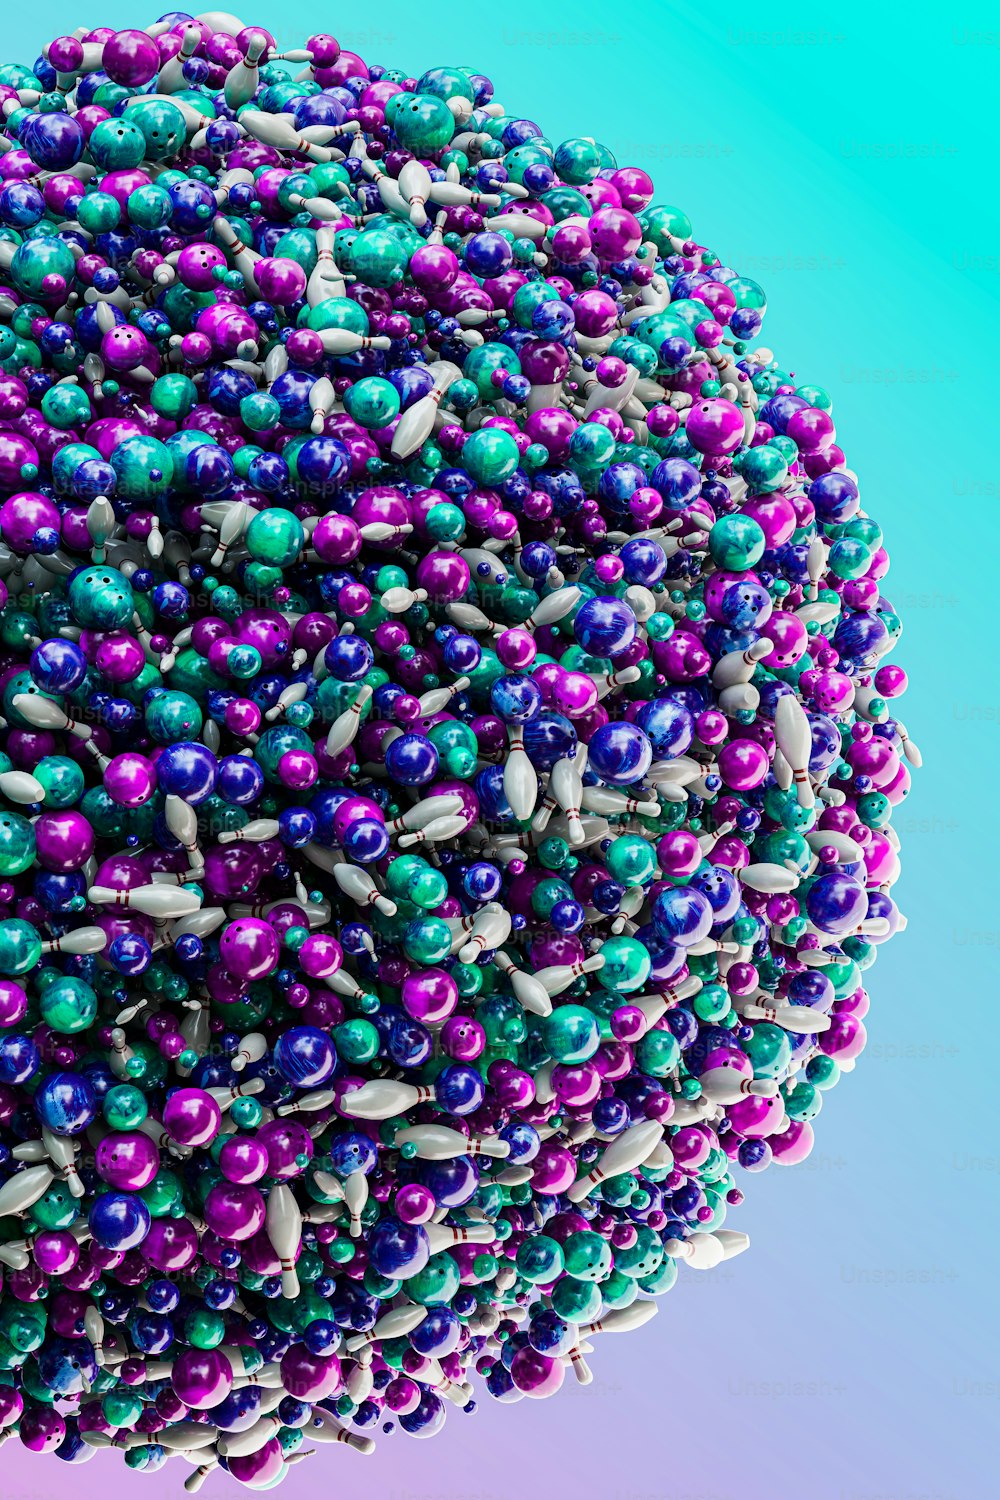 a close up of a ball of beads on a blue and purple background